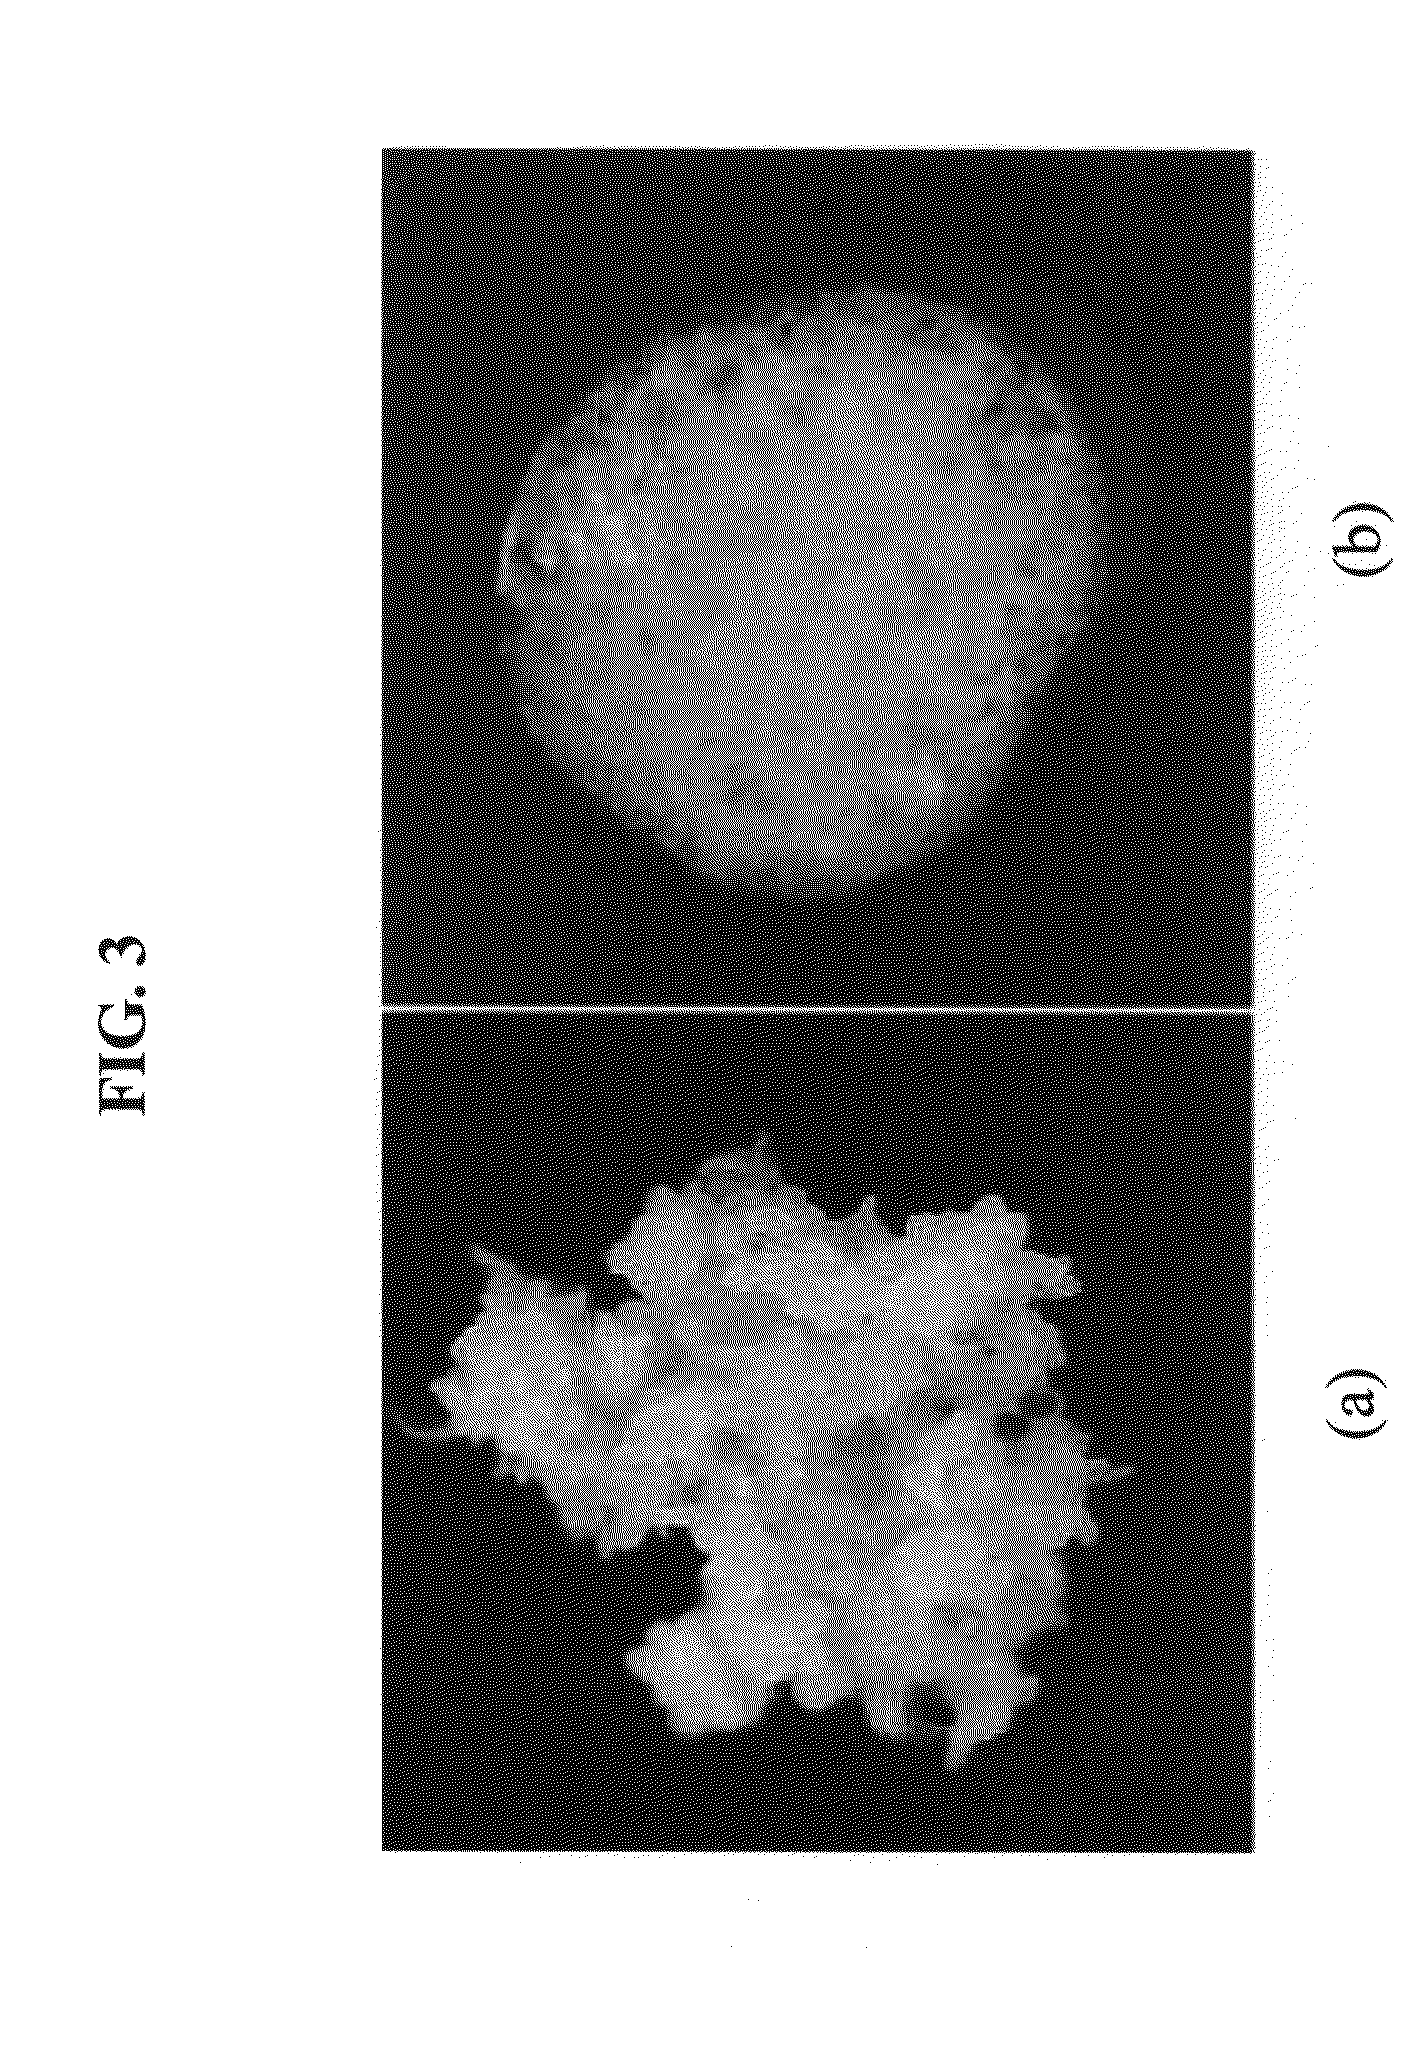 Plant stem cell line derived from quiescent center and method for isolating the same